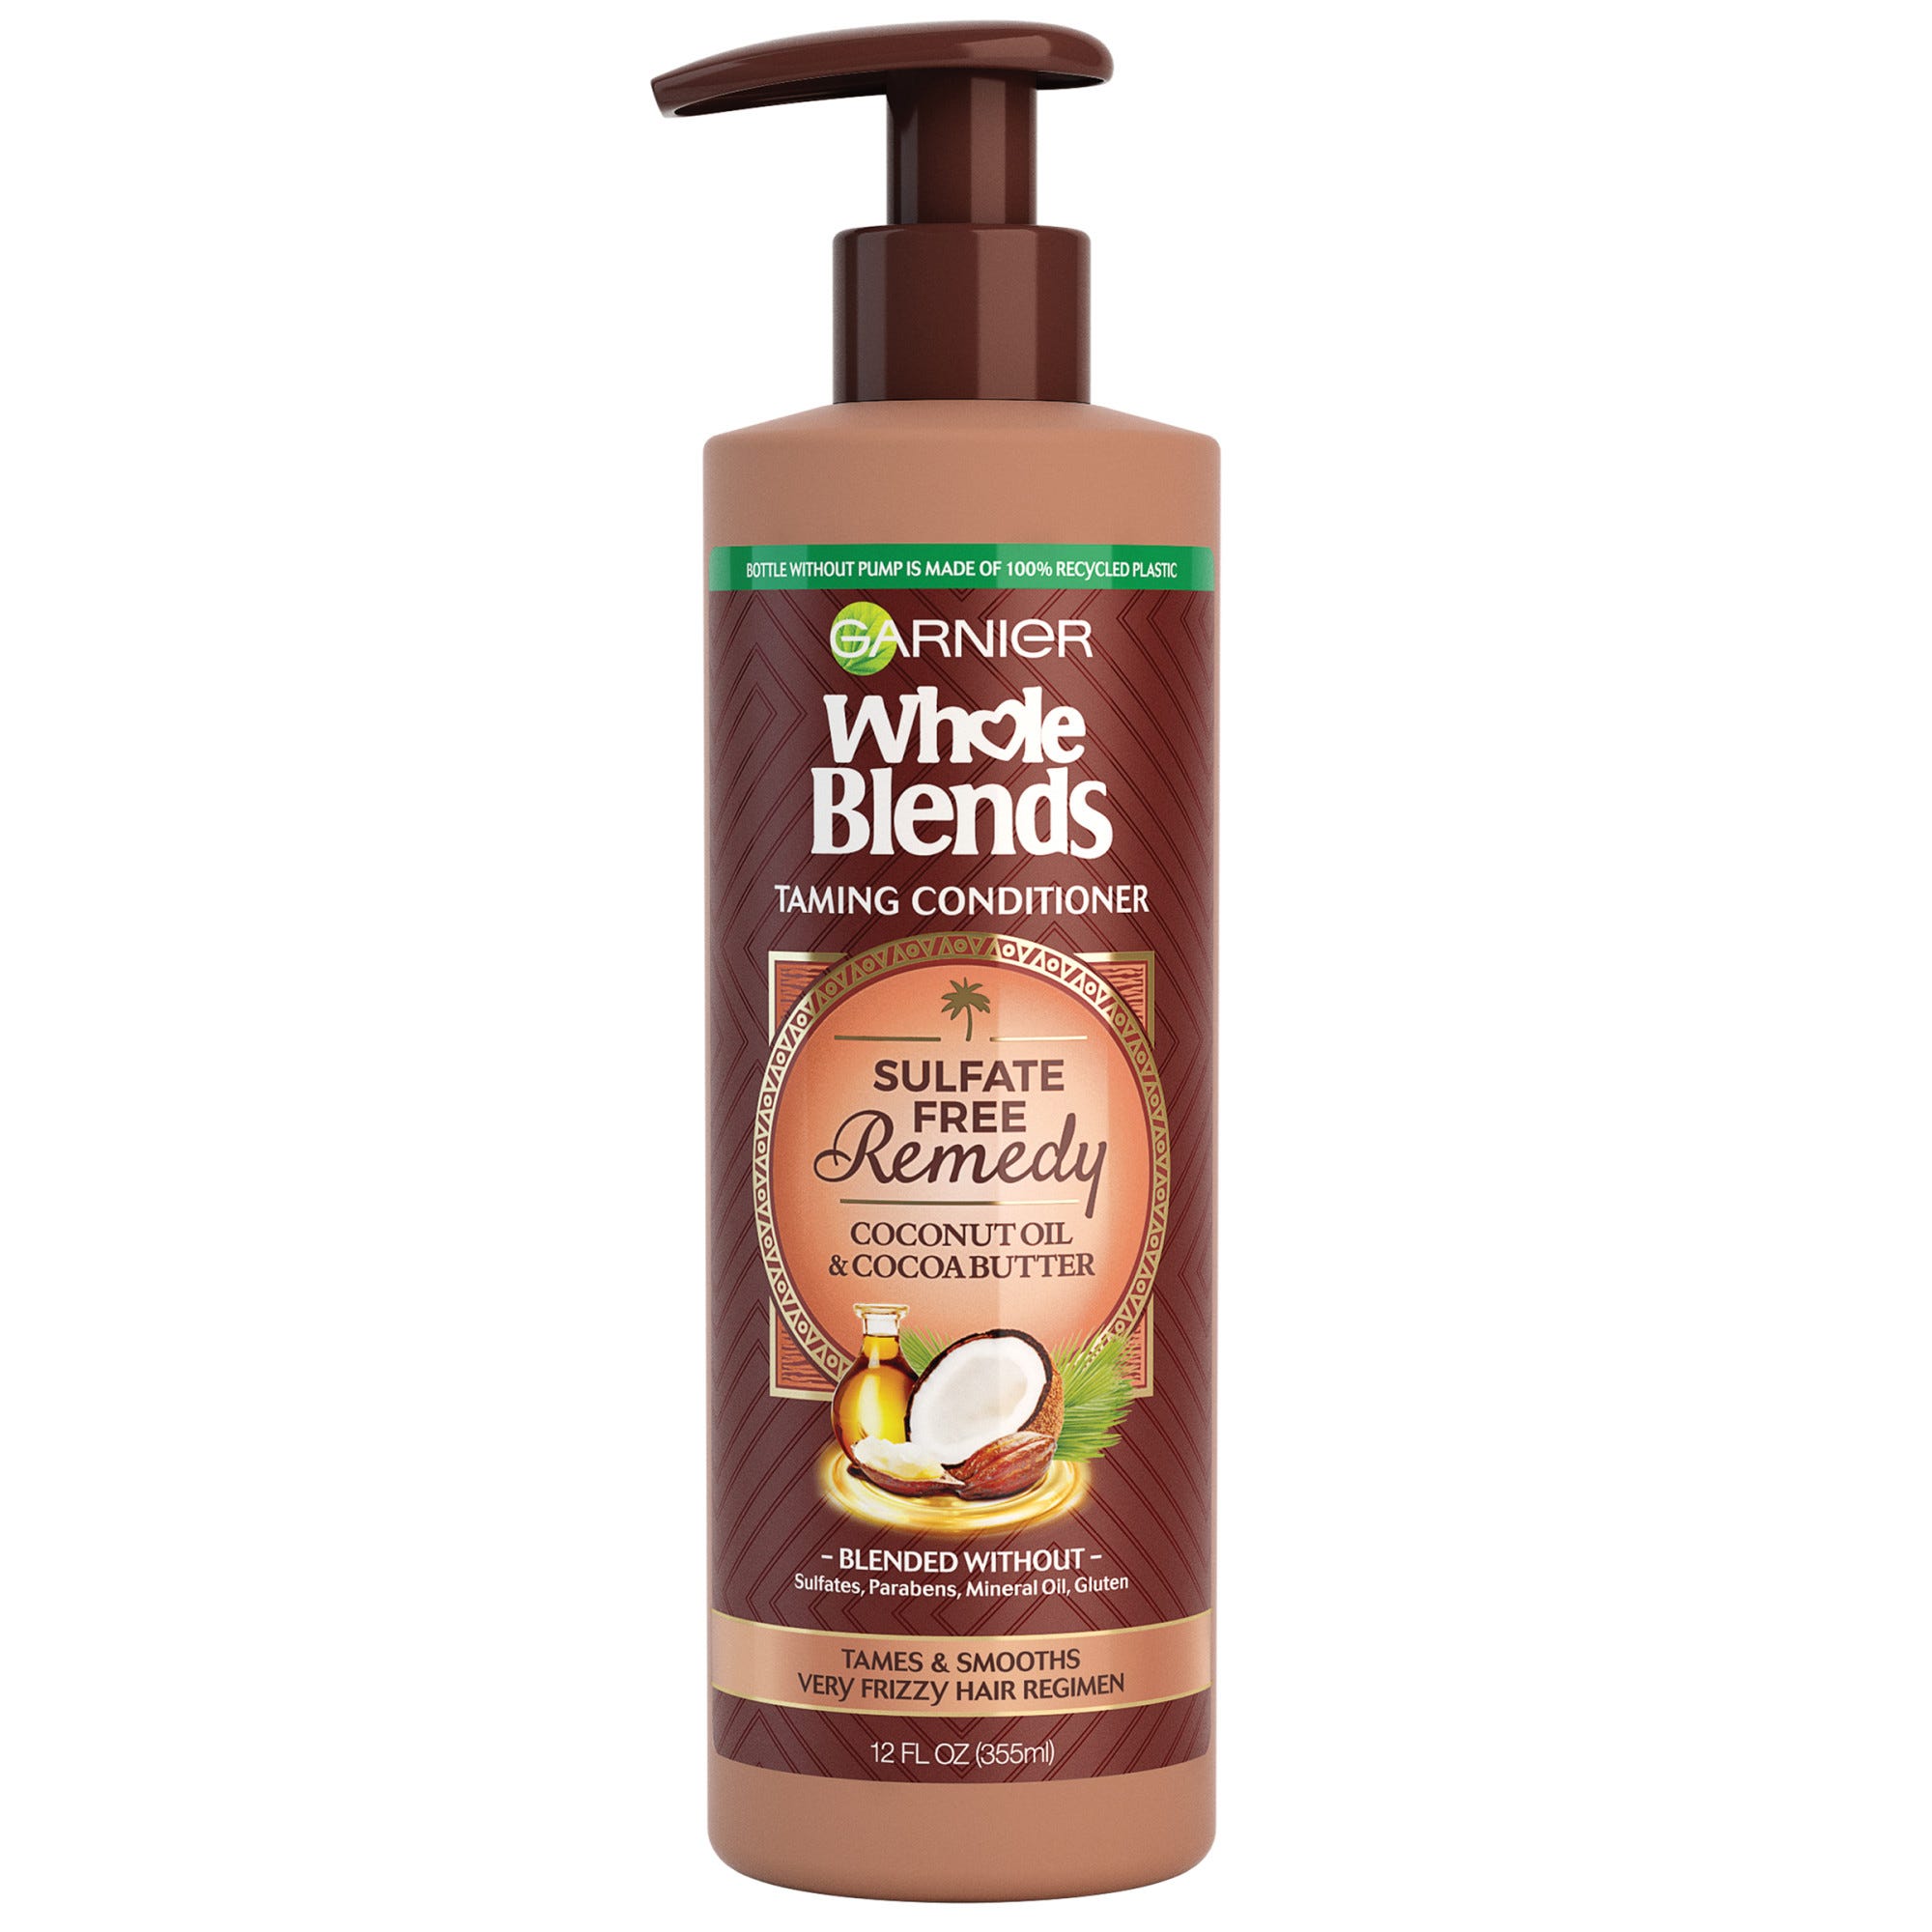 Garnier Whole Blends Sulfate Free Remedy Coconut Oil, Conditioner for Frizzy Hair - 12 fl oz